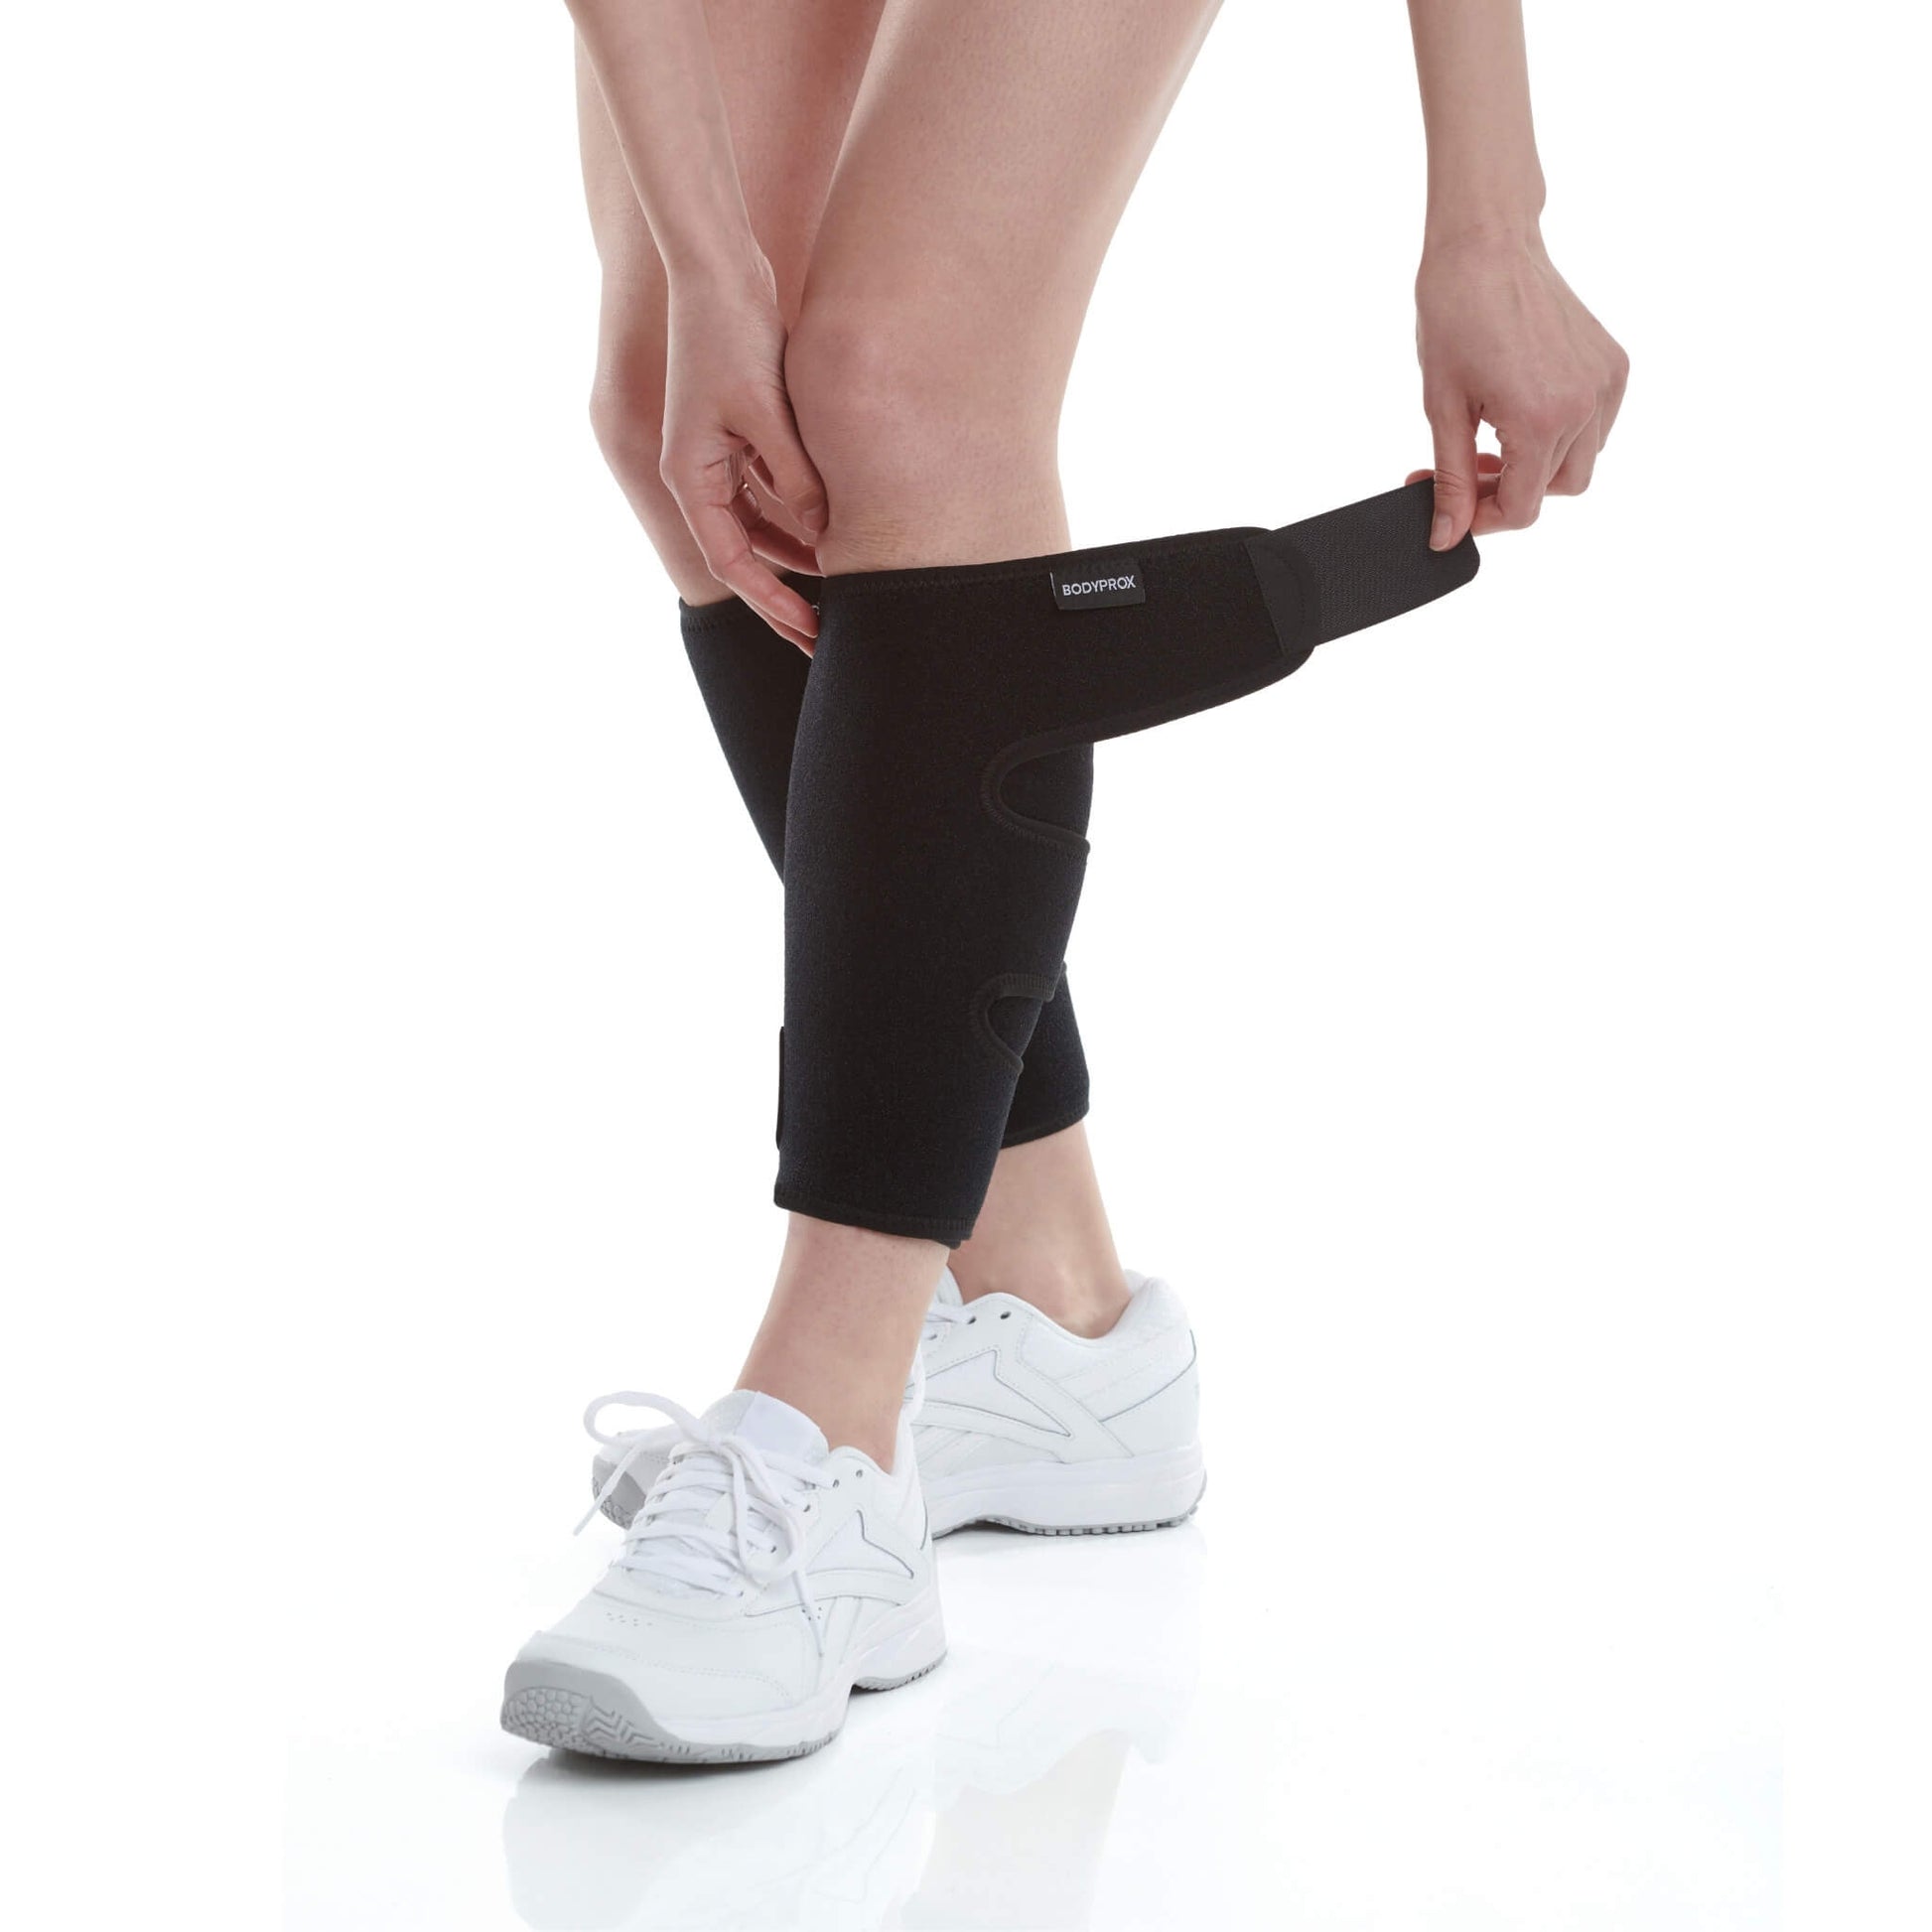 Neoprene calf support ATHLETIC – CALF SUPPORT MB 4100 –